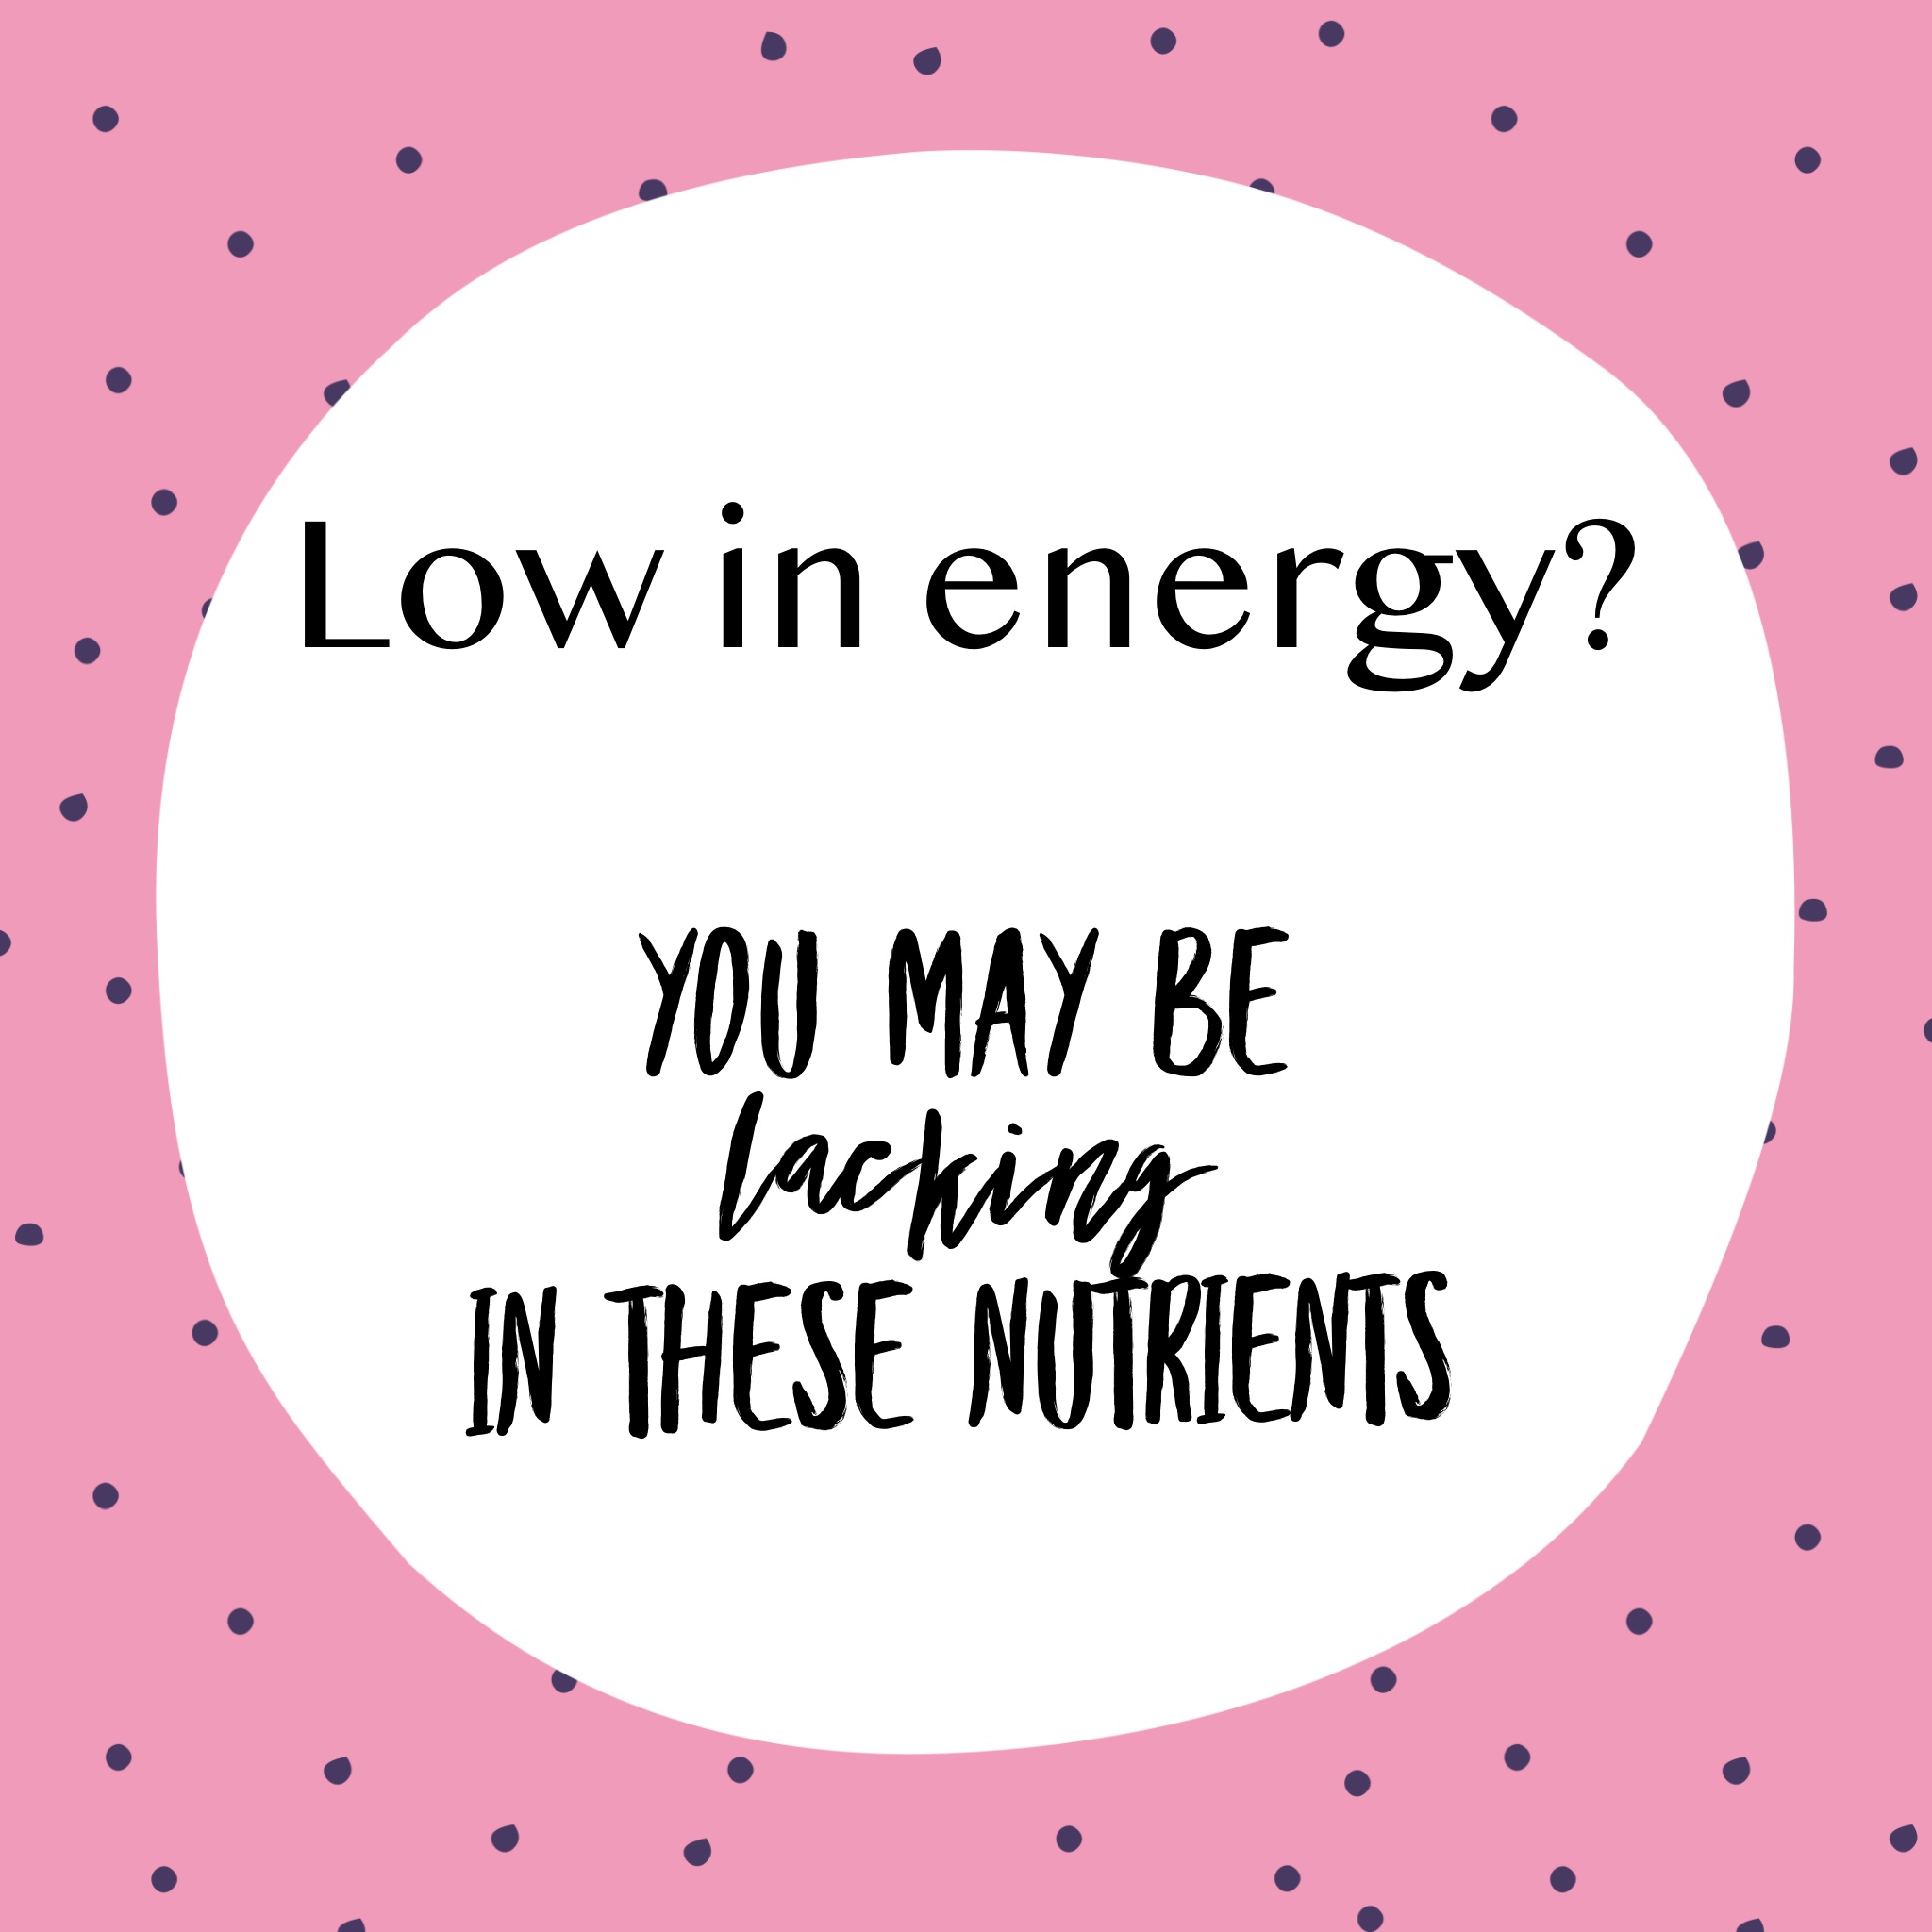 Weekly tip - Low in energy? You may be lacking in these nutrients